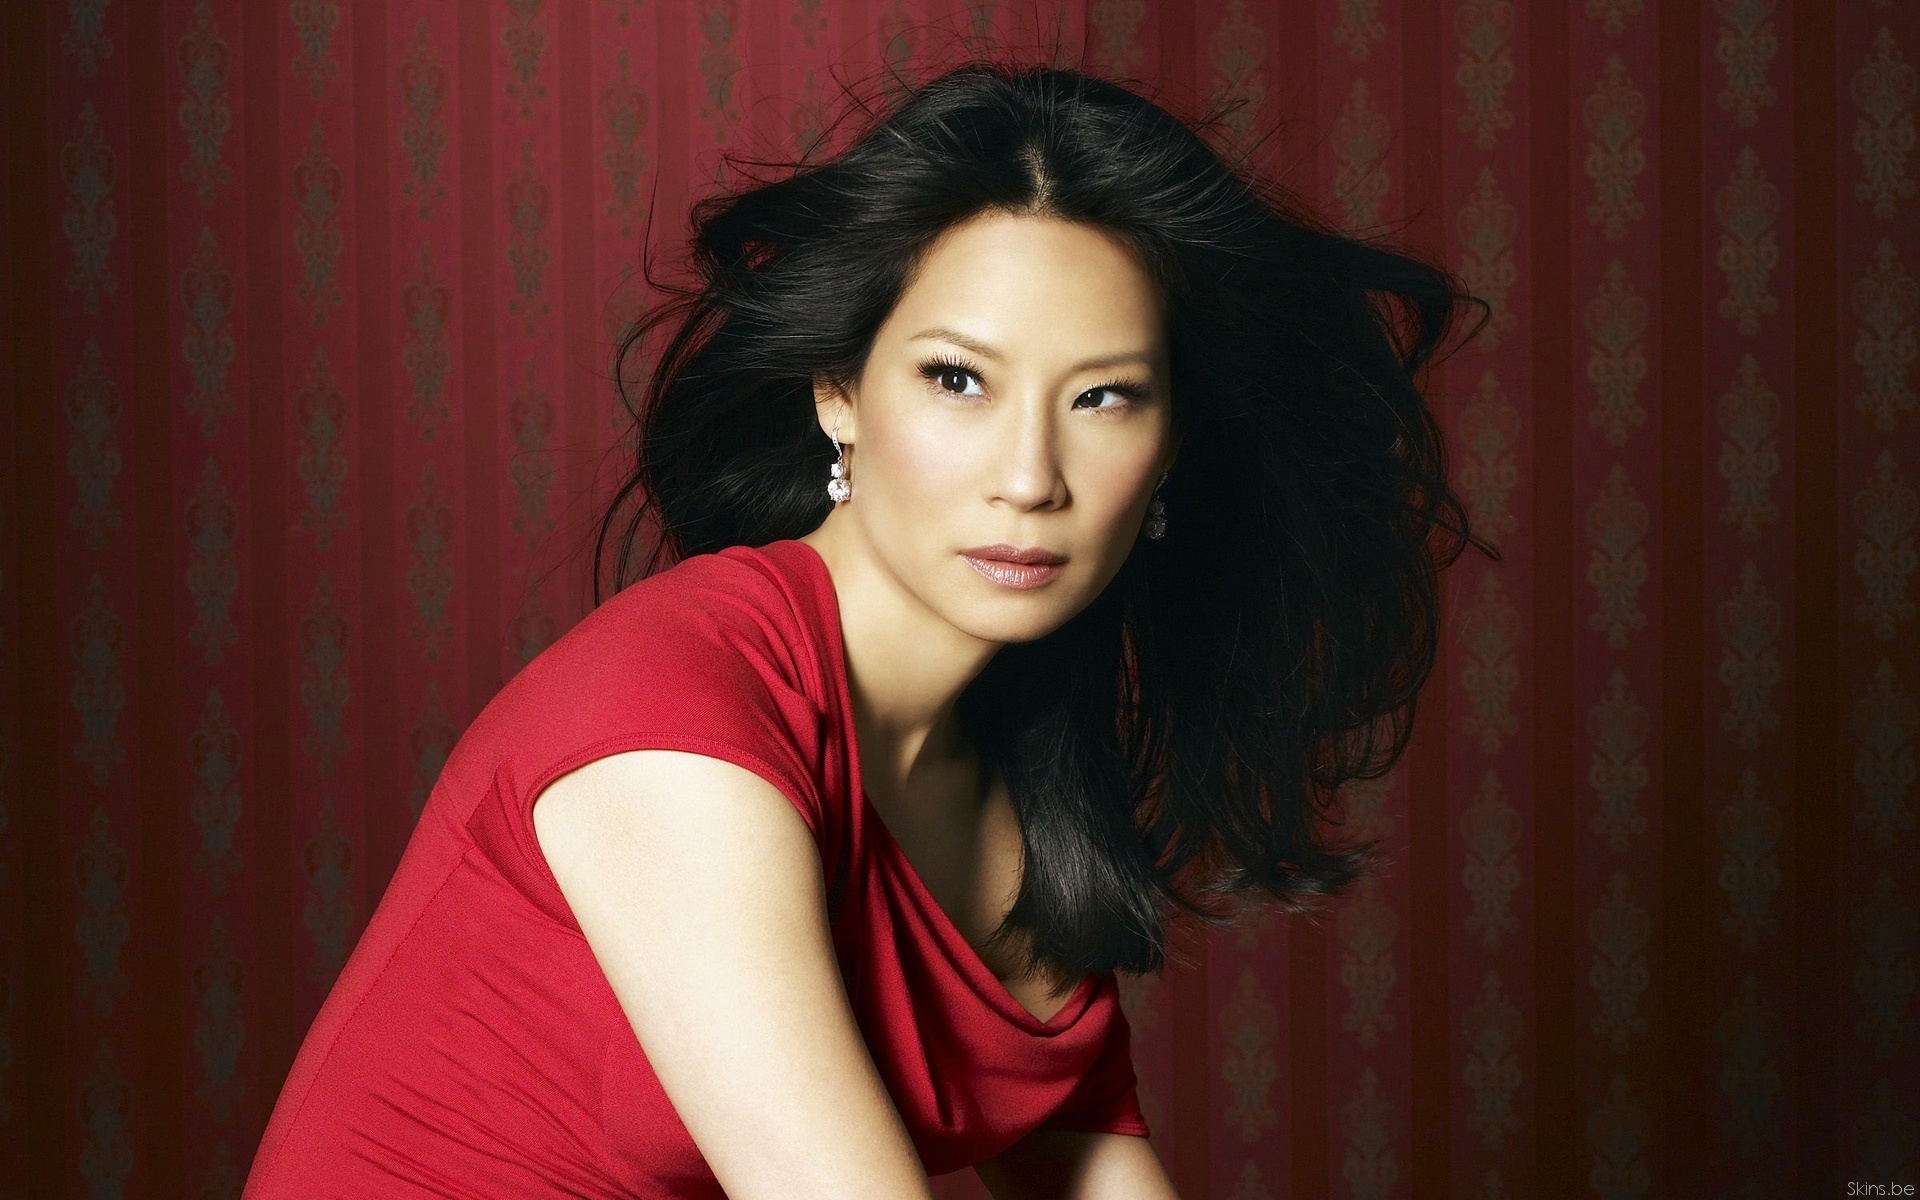 Lucy Liu: Made her mainstream movie debut as one of many former girlfriends of Tom Cruise's character in Jerry Maguire, 1996. 1920x1200 HD Background.